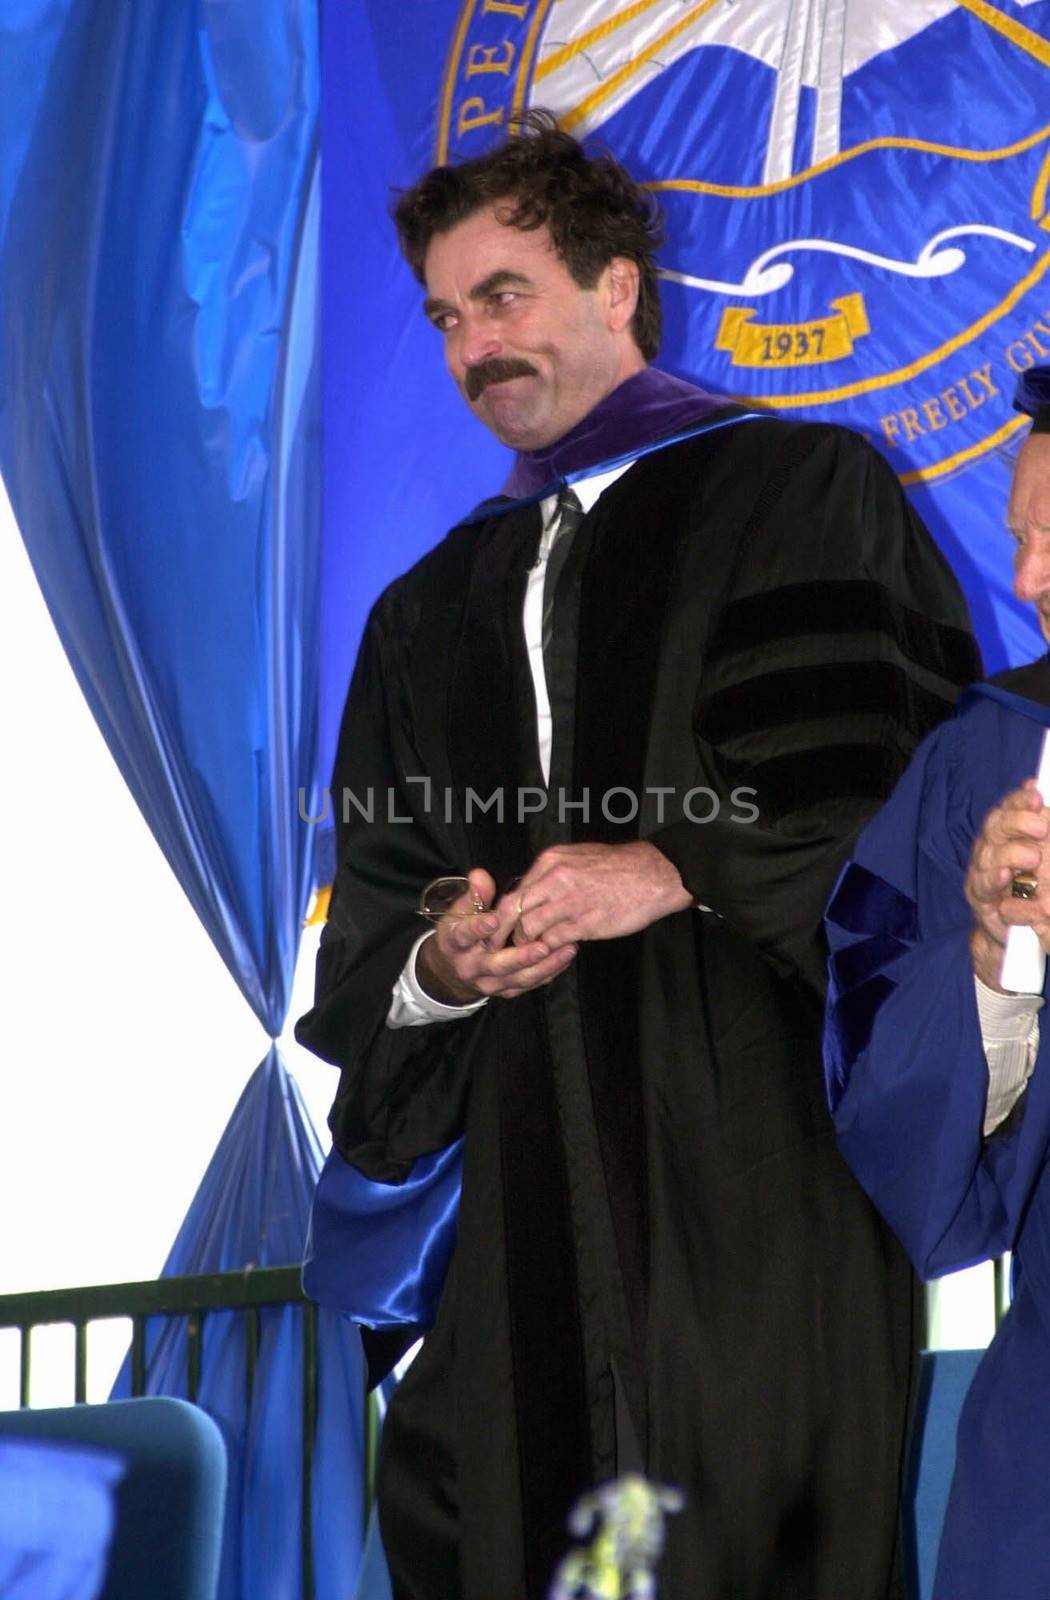 Tom Selleck Degree by ImageCollect